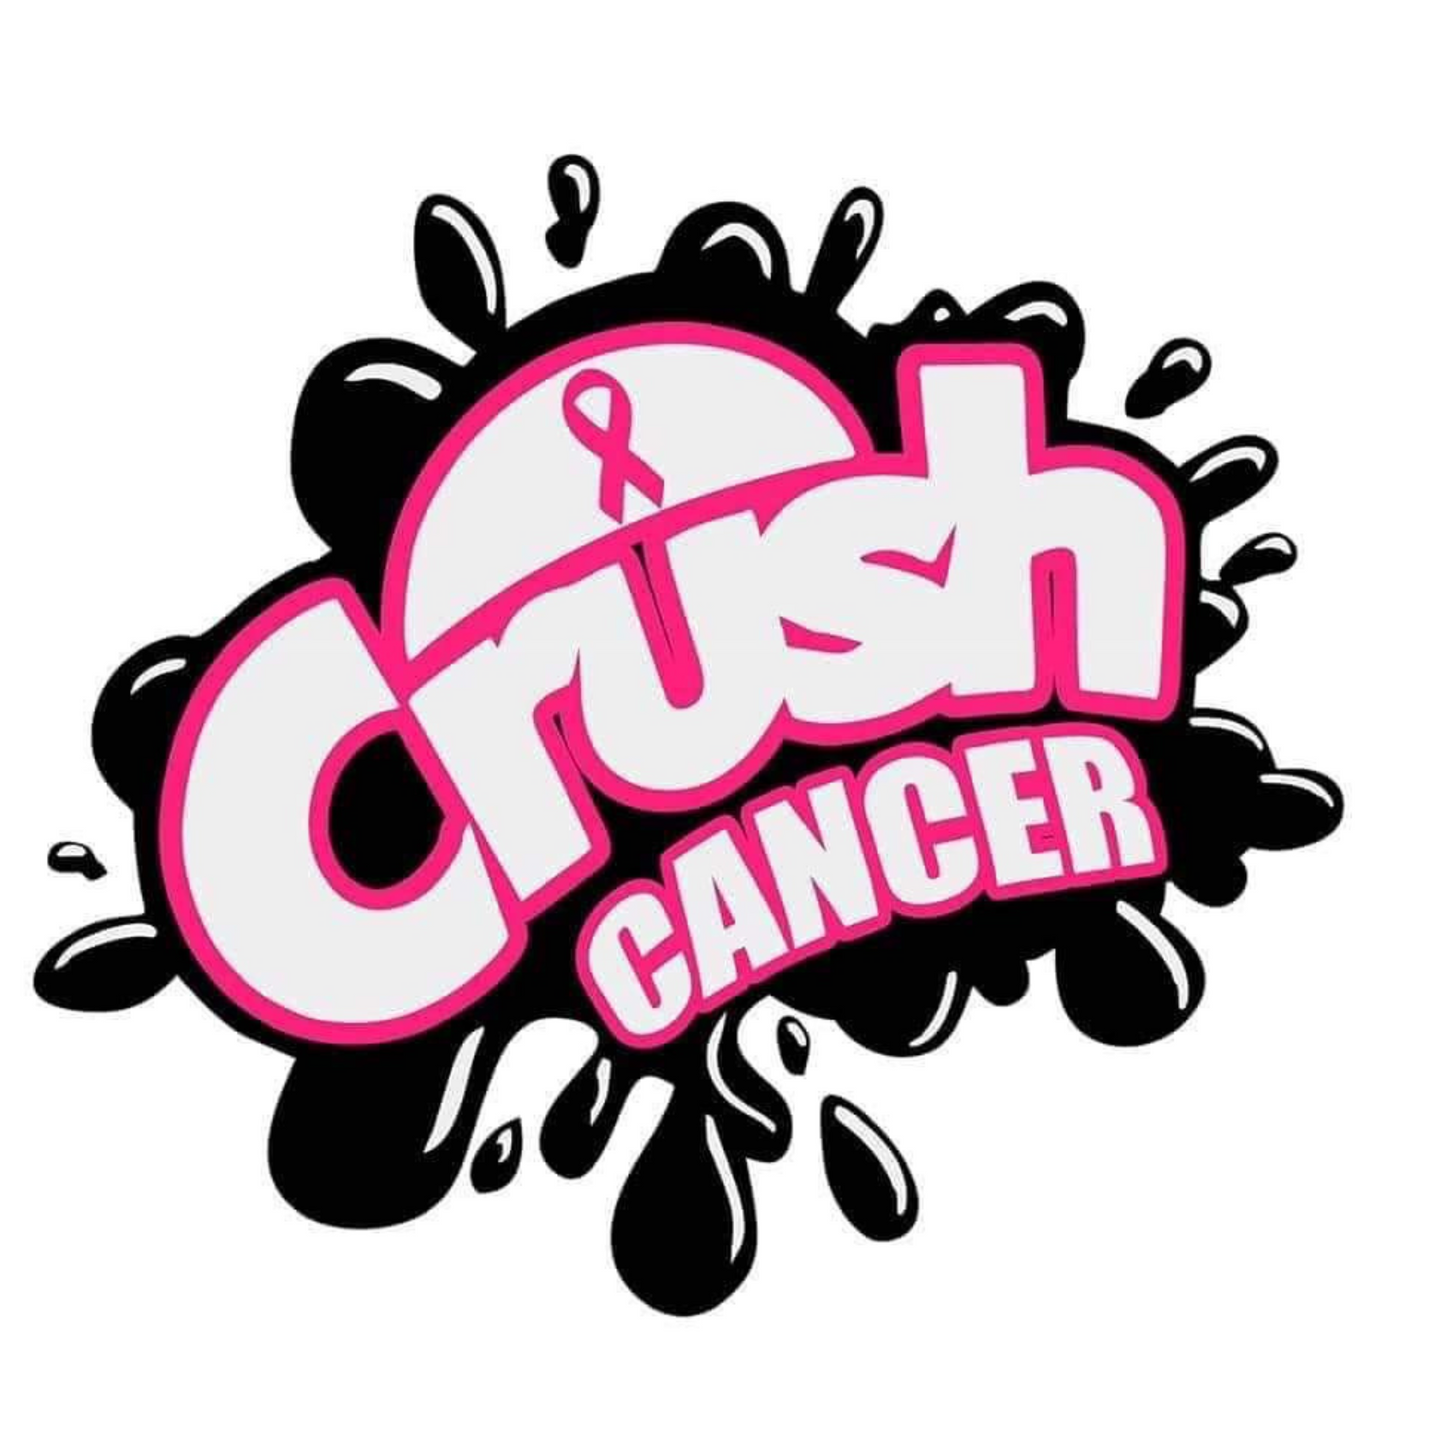 CRUSH AWARENESS TEE'S - MANY OPTIONS AVAILABLE